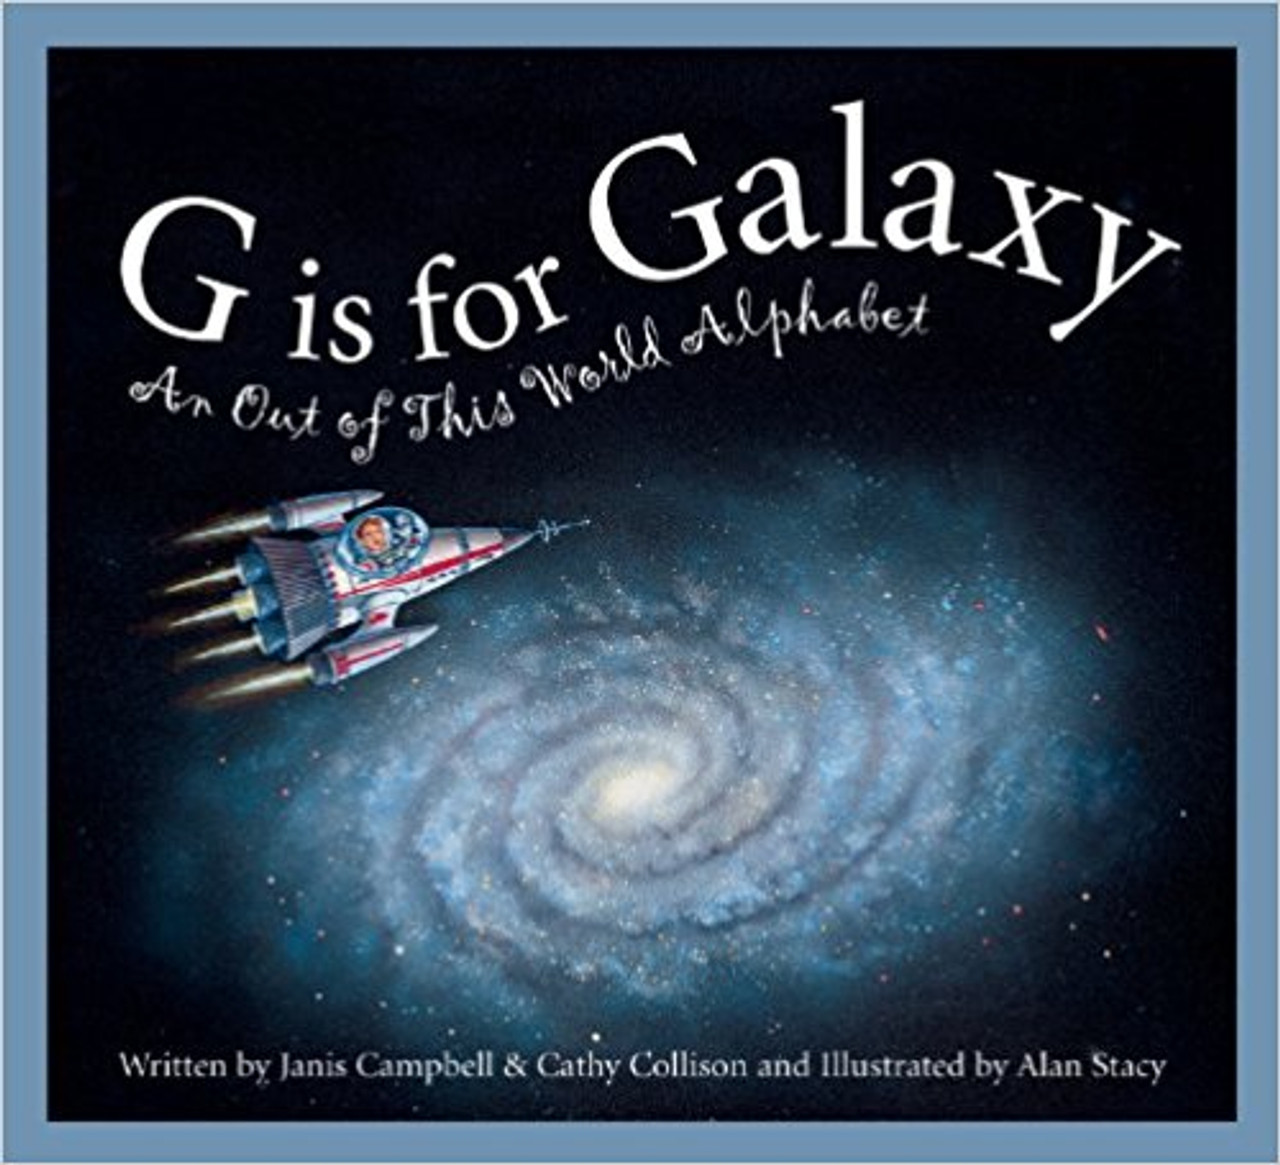 G is for Galaxy: An Out of This World Alphabet by Janis Campbell